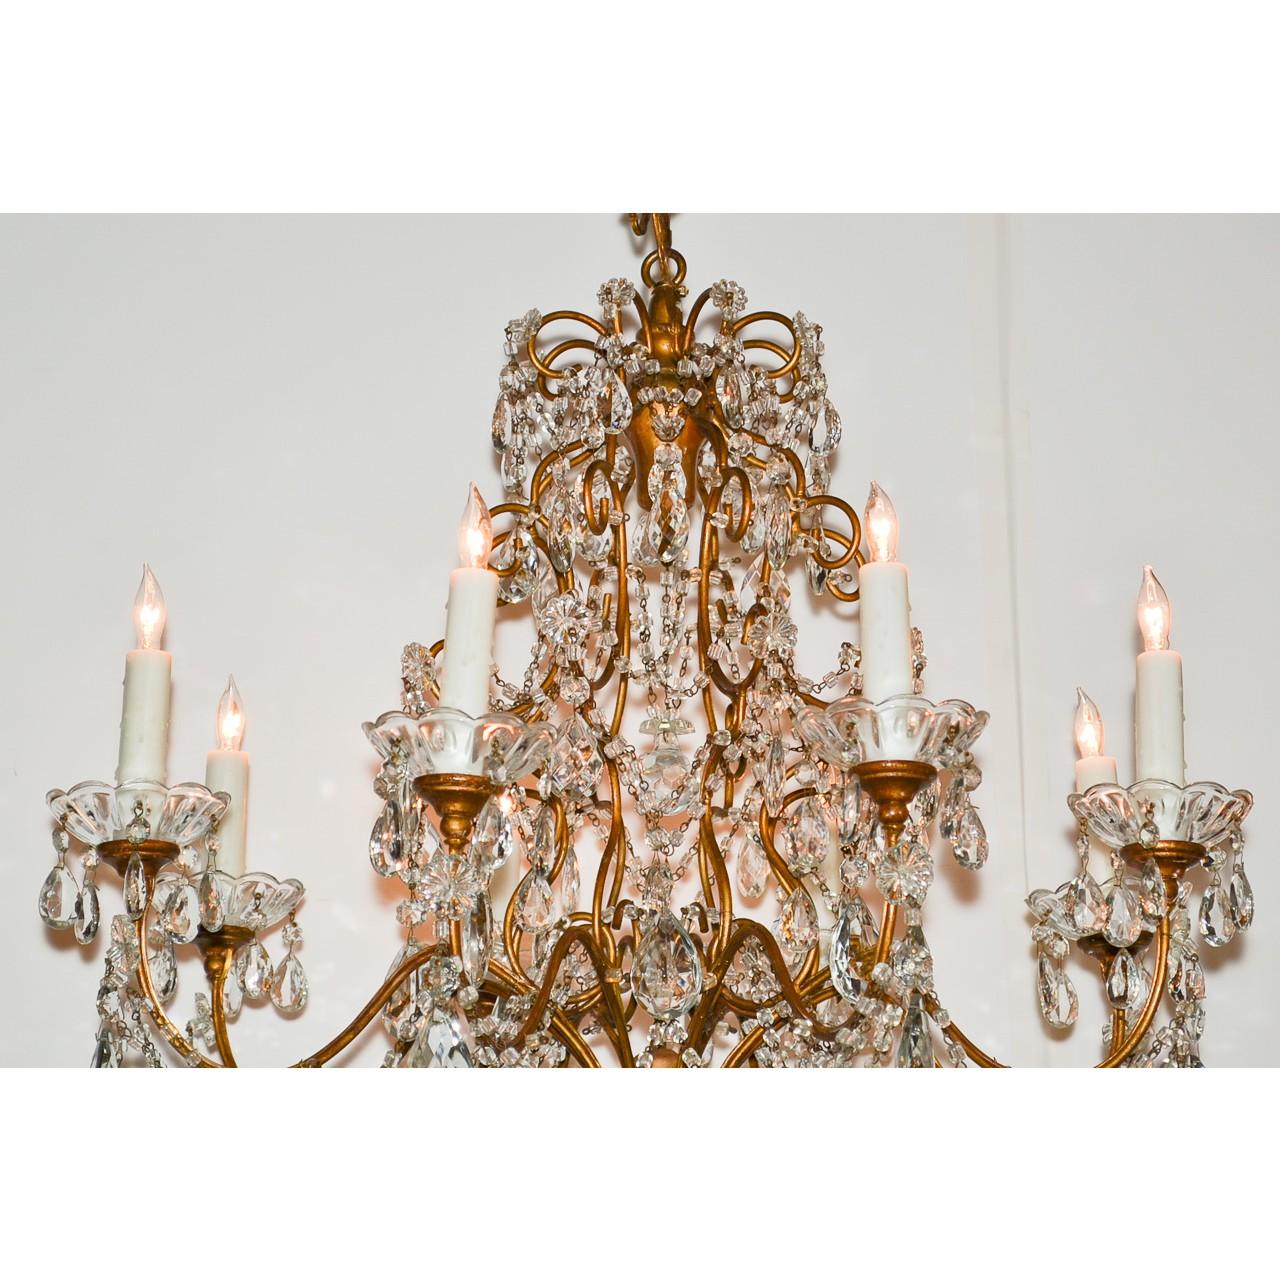 Carved Italian Cut Crystal and Tole Chandelier, circa 1920